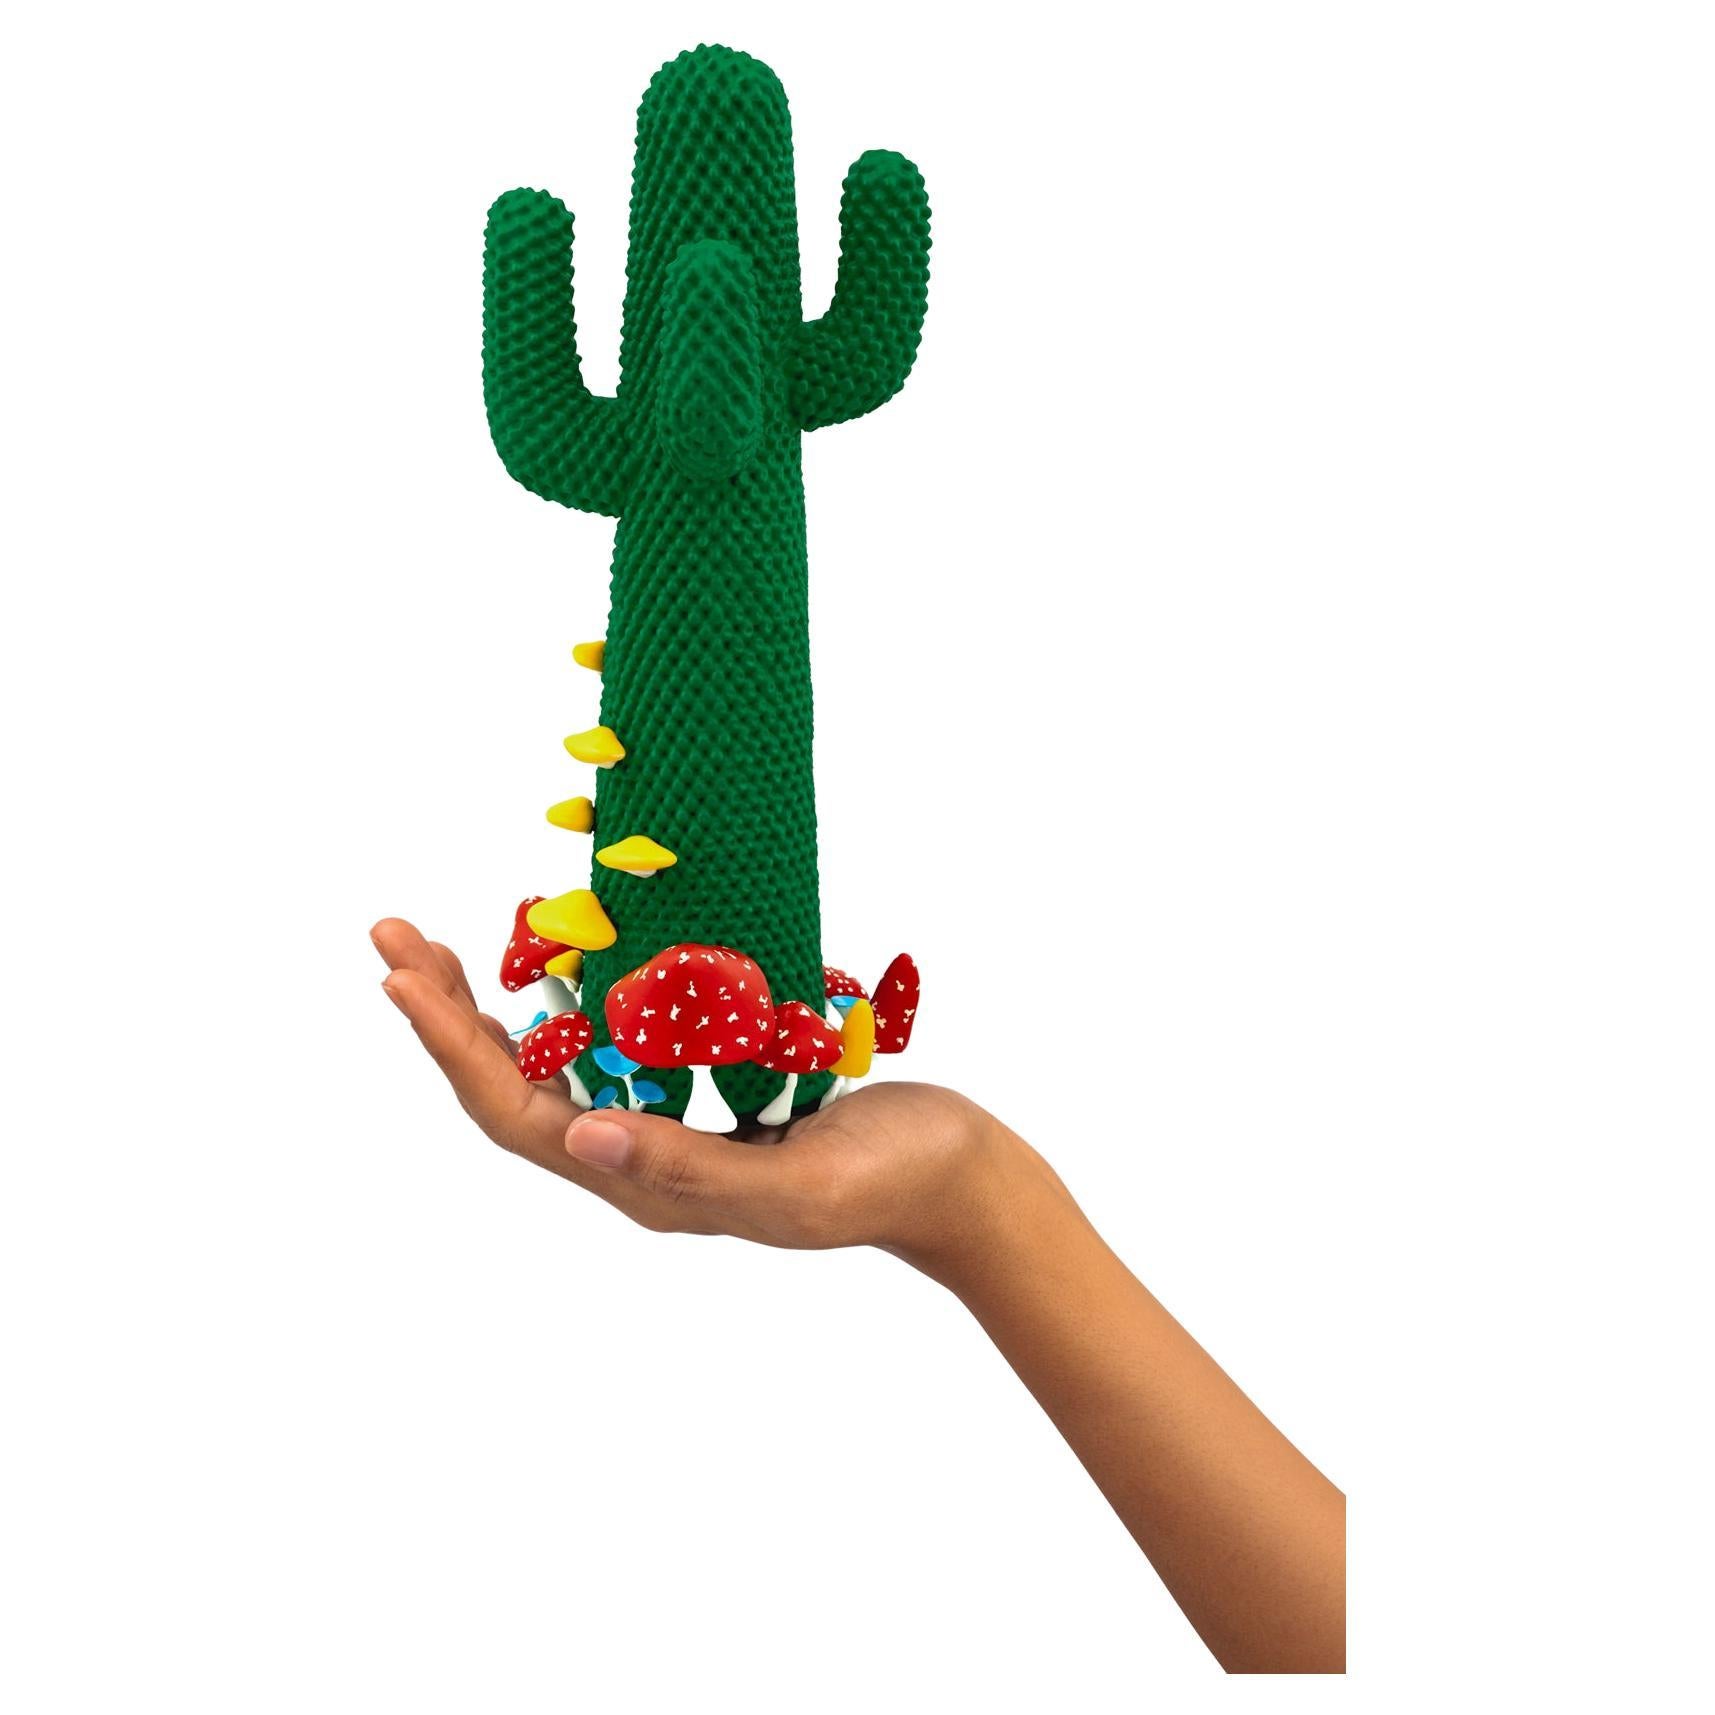 Limited Edition #12/99

Gufram presents the miniaturised version of the Shroom CACTUS® created in collaboration with A$AP Rocky and the artist’s new design studio HOMMEMADE Exactly as the real-Size Shroom CACTUS®, the new Guframini piece features